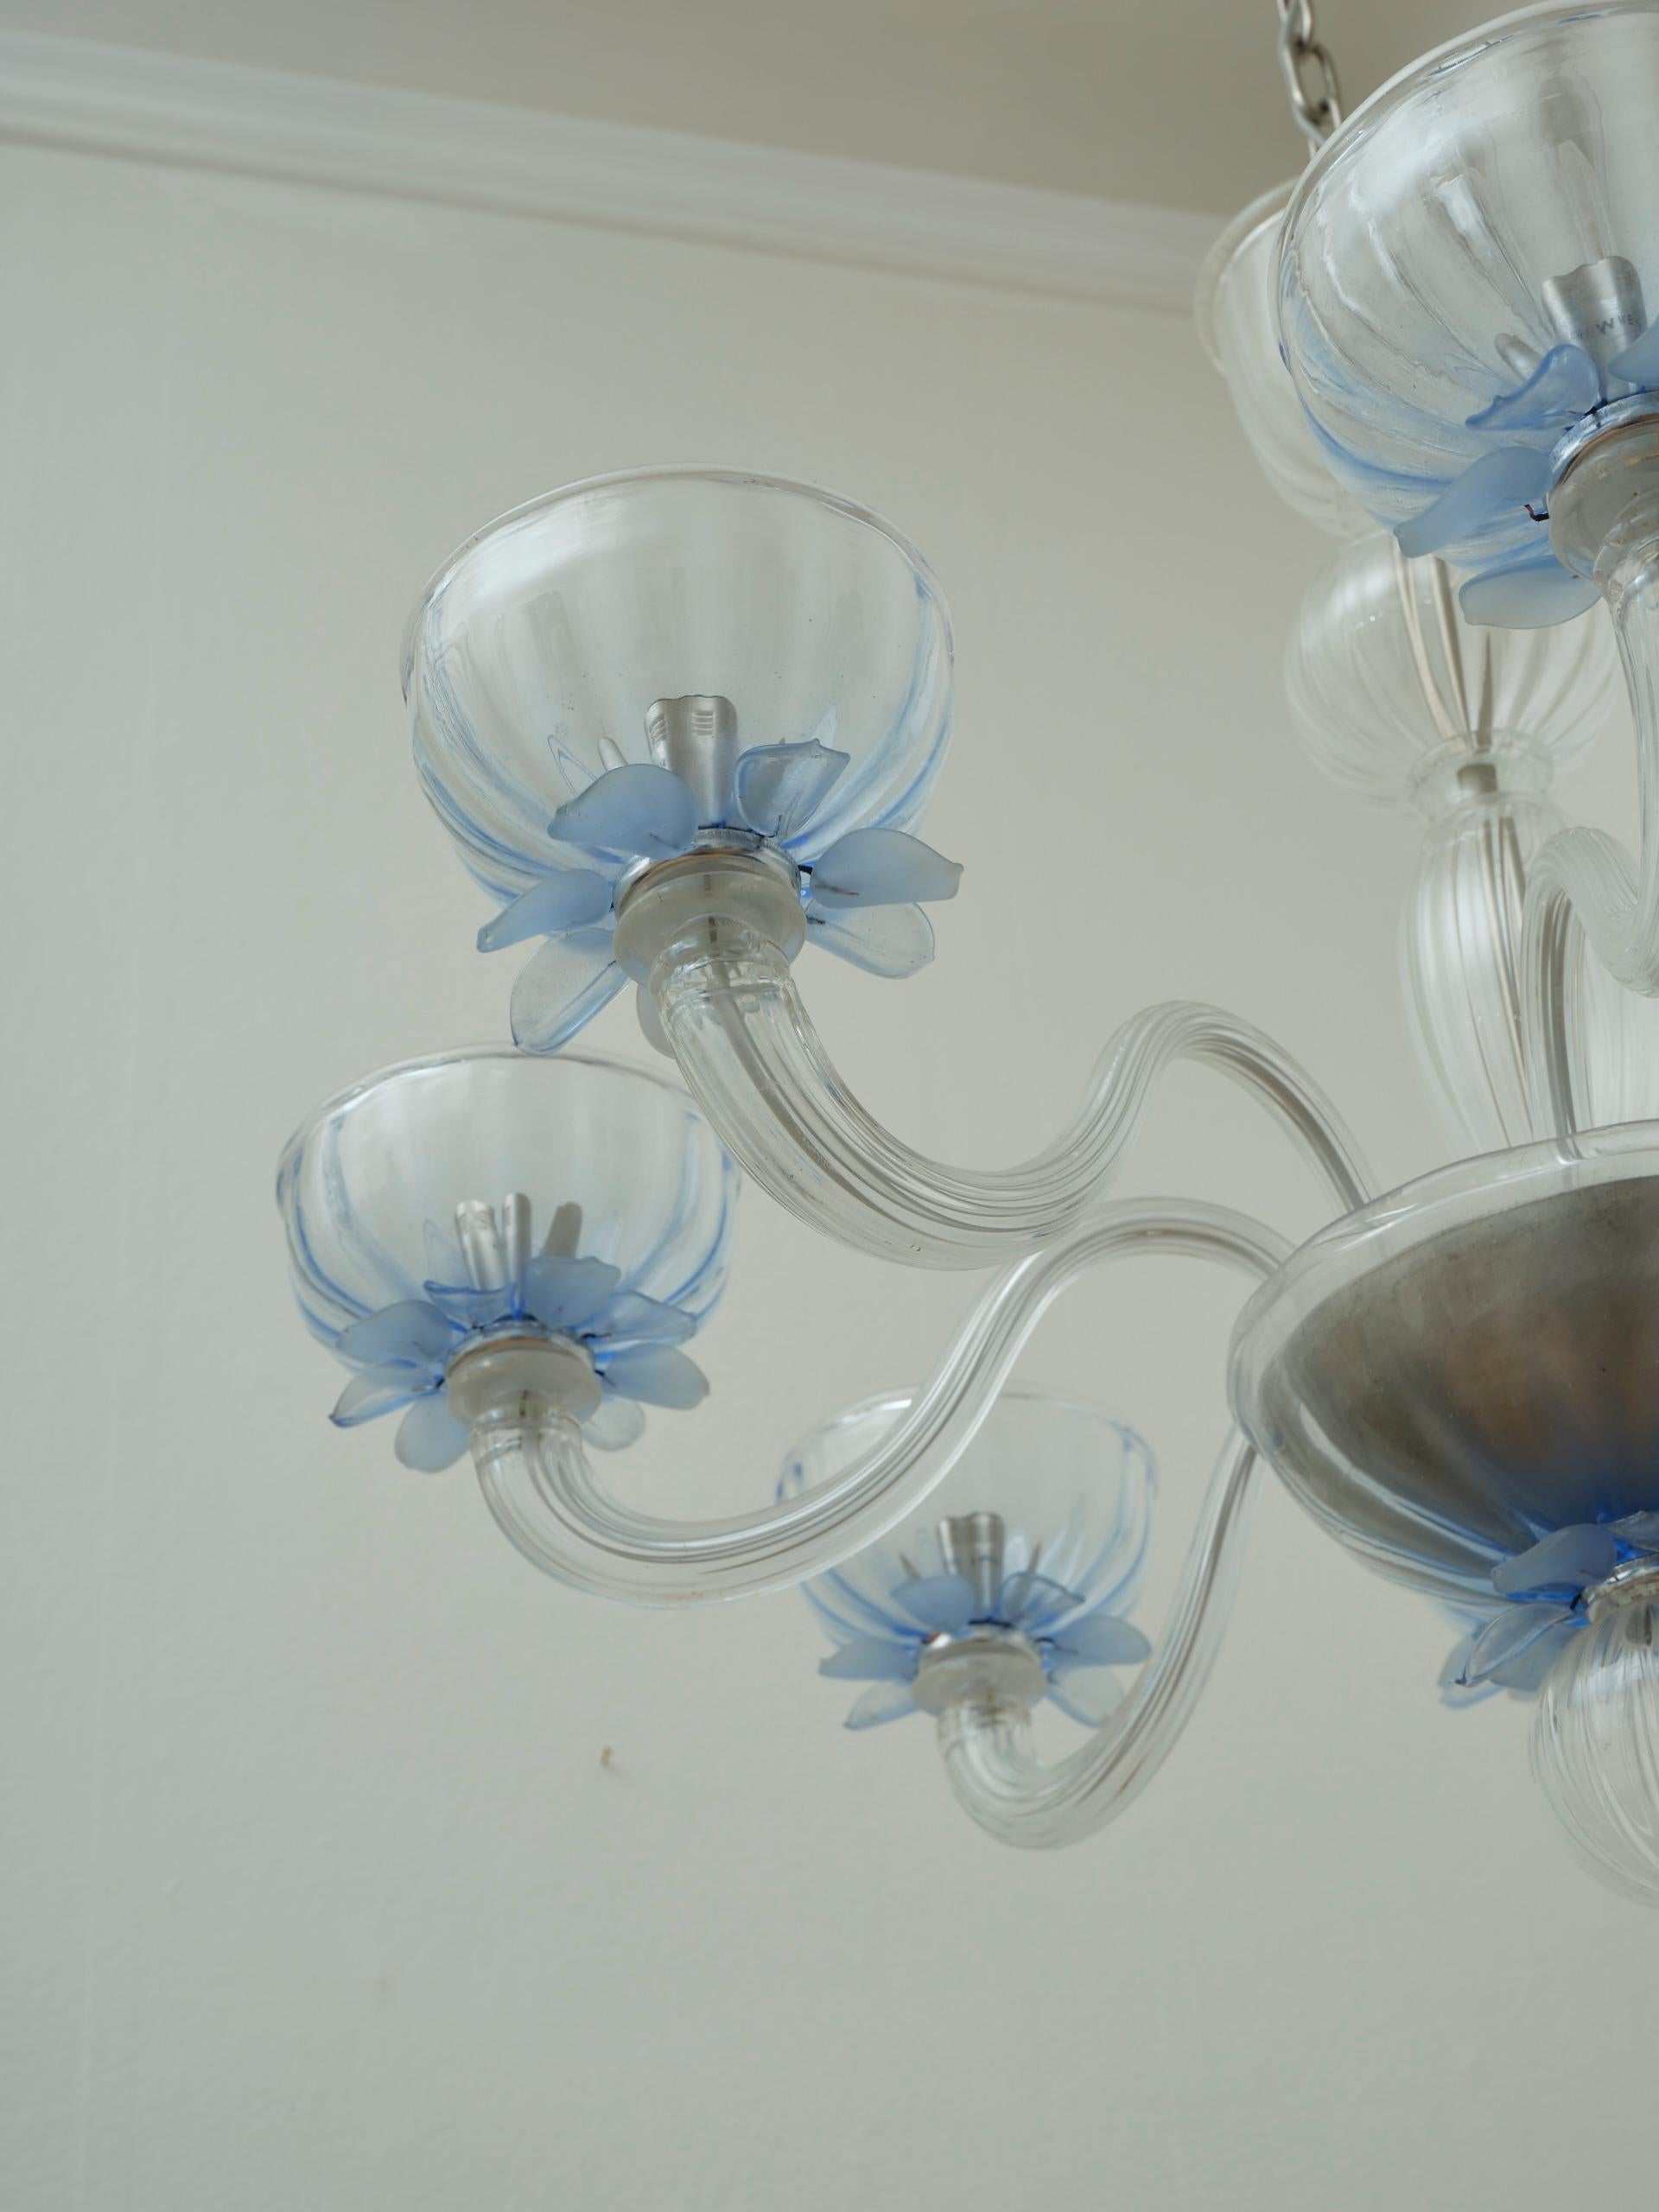 Giant European glass chandelier 8 arms blue details in the style of Murano For Sale 3